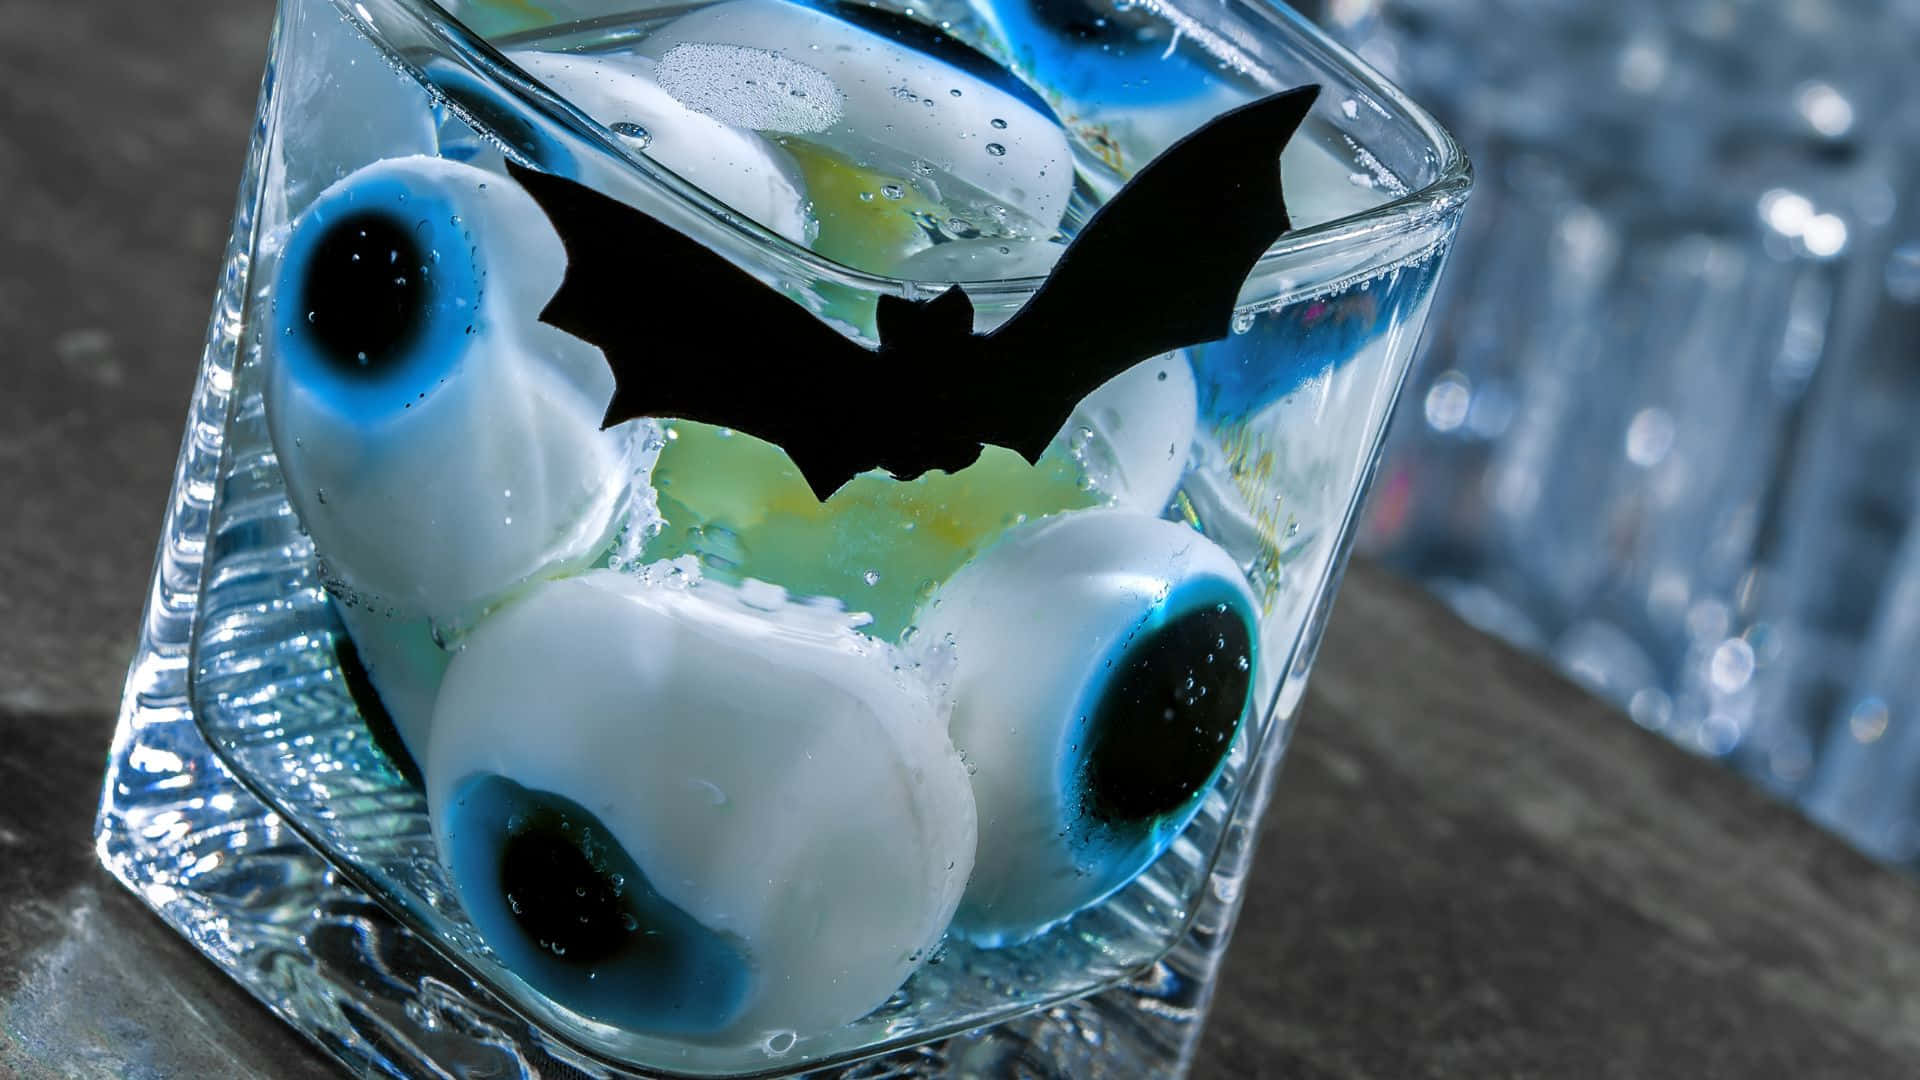 Your Halloween Party Just Got Spooky with These Unique Drinks" Wallpaper